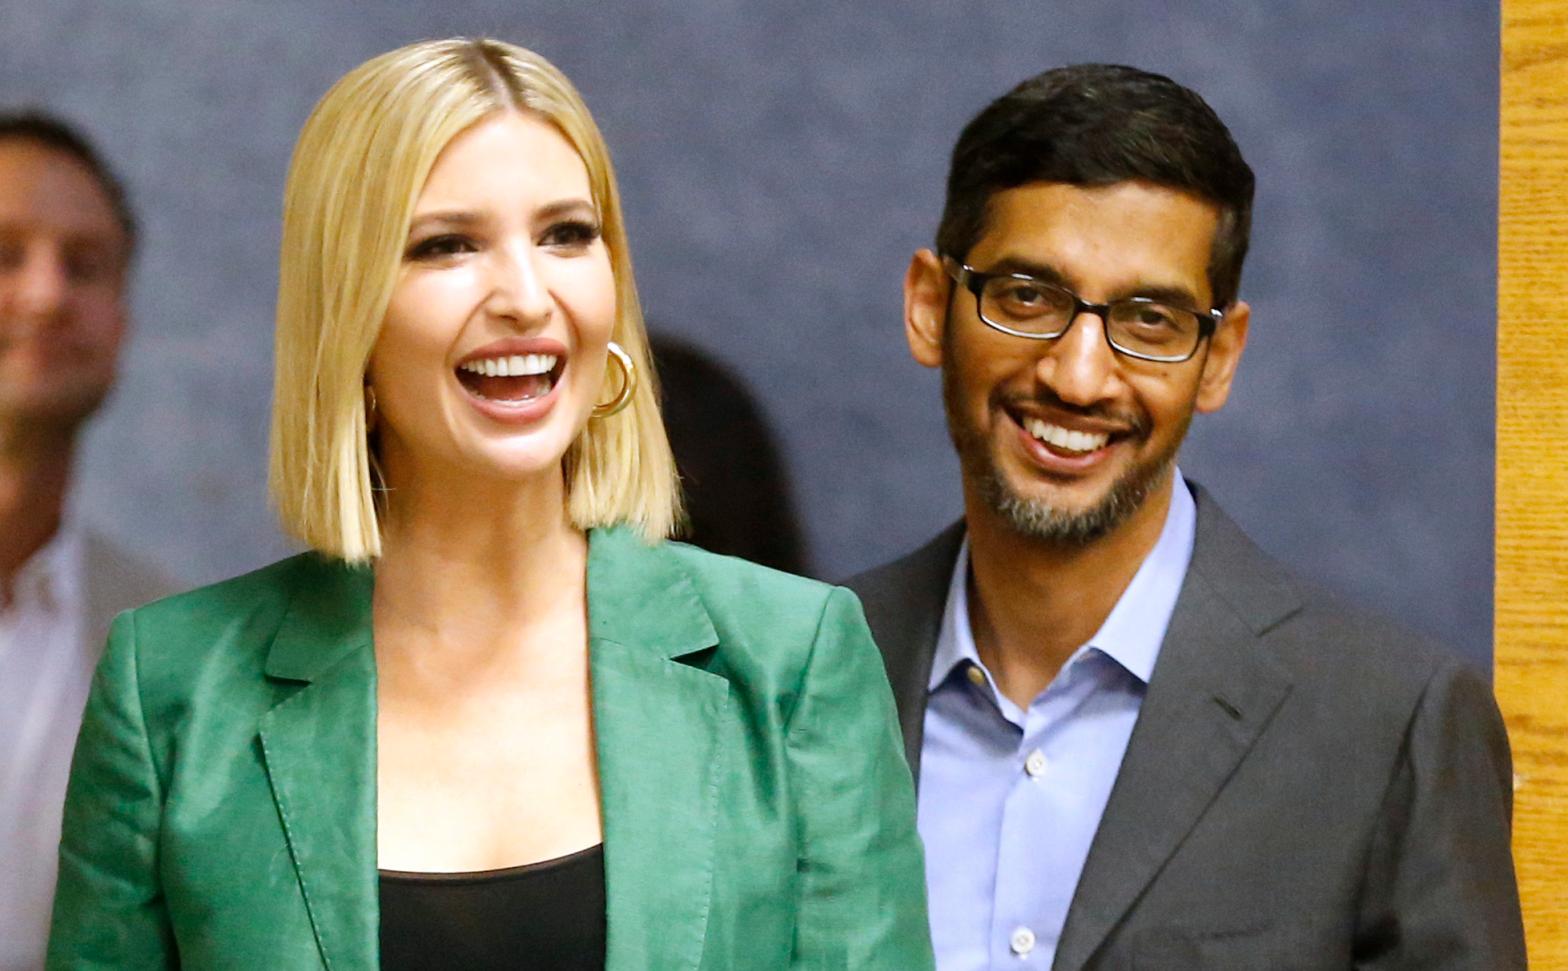 White House advisor Ivanka Trump and the CEO of Google, Sundar Pichai, arrive for a roundtable discussion focusing on assisting American workers for the changing economy on October 3, 2019, in Dallas, Texas. (Photo: Ron Jenkins, Getty Images)